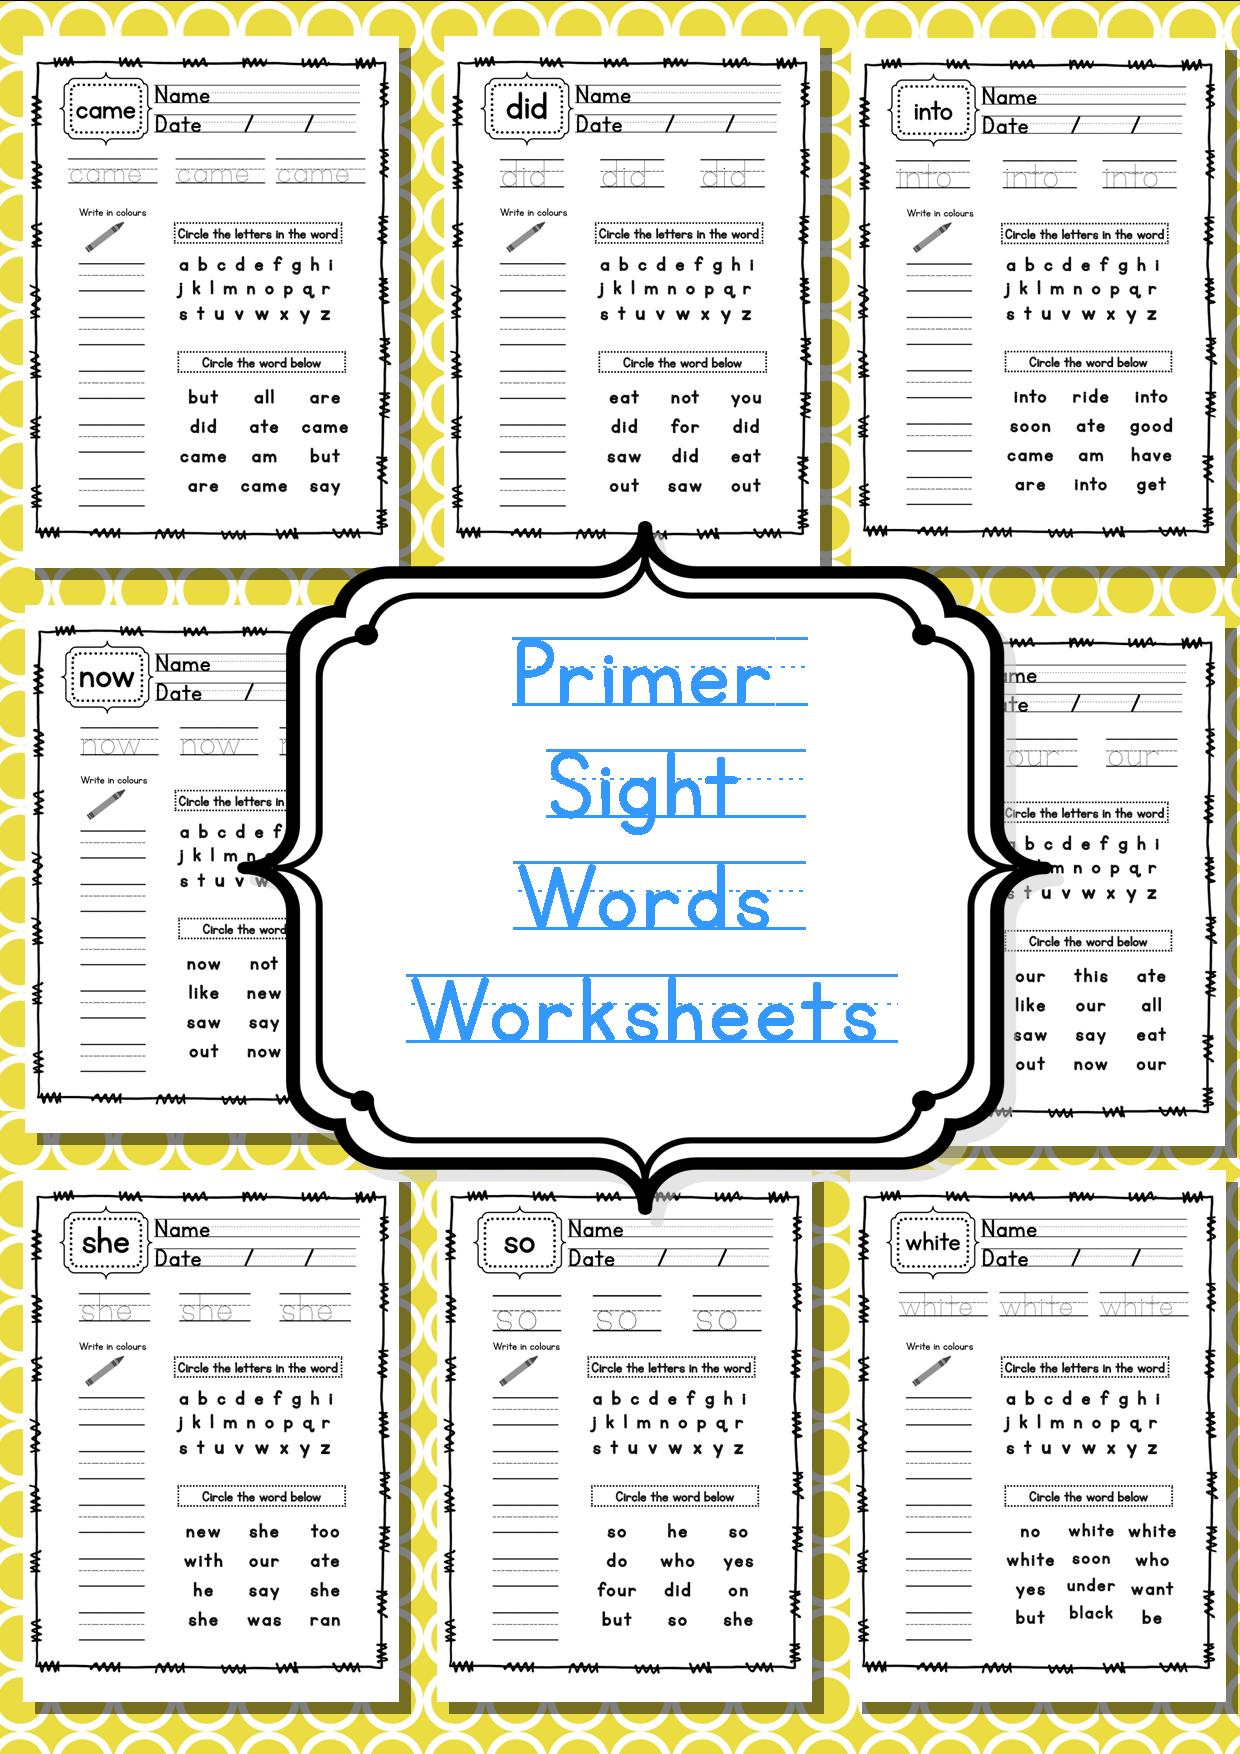 Here primer worksheets The of 52 me all  word sight worksheets. includes  sight is word  pdf set a